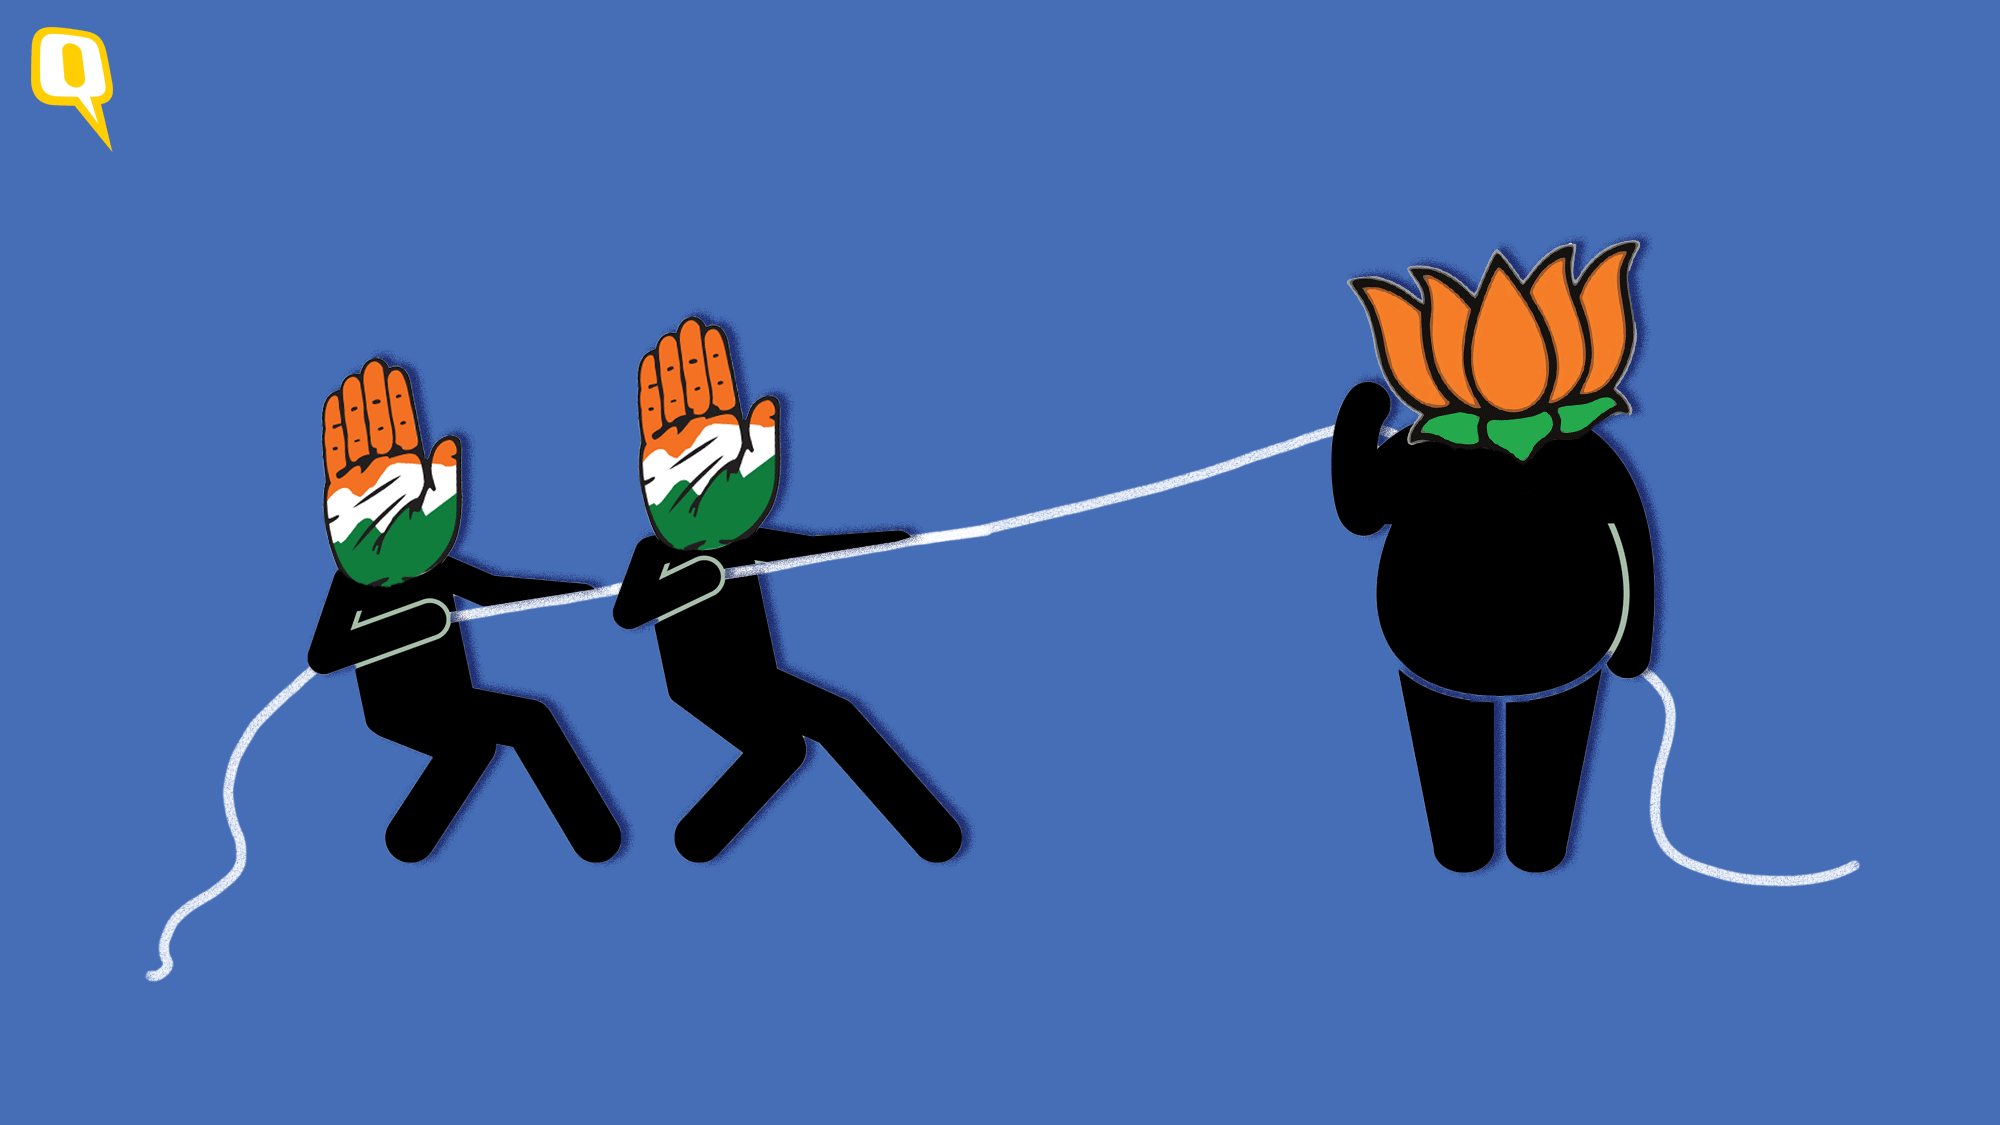 The existing formula of anti-BJP parties, based on secularism, has lost its appeal among voters.